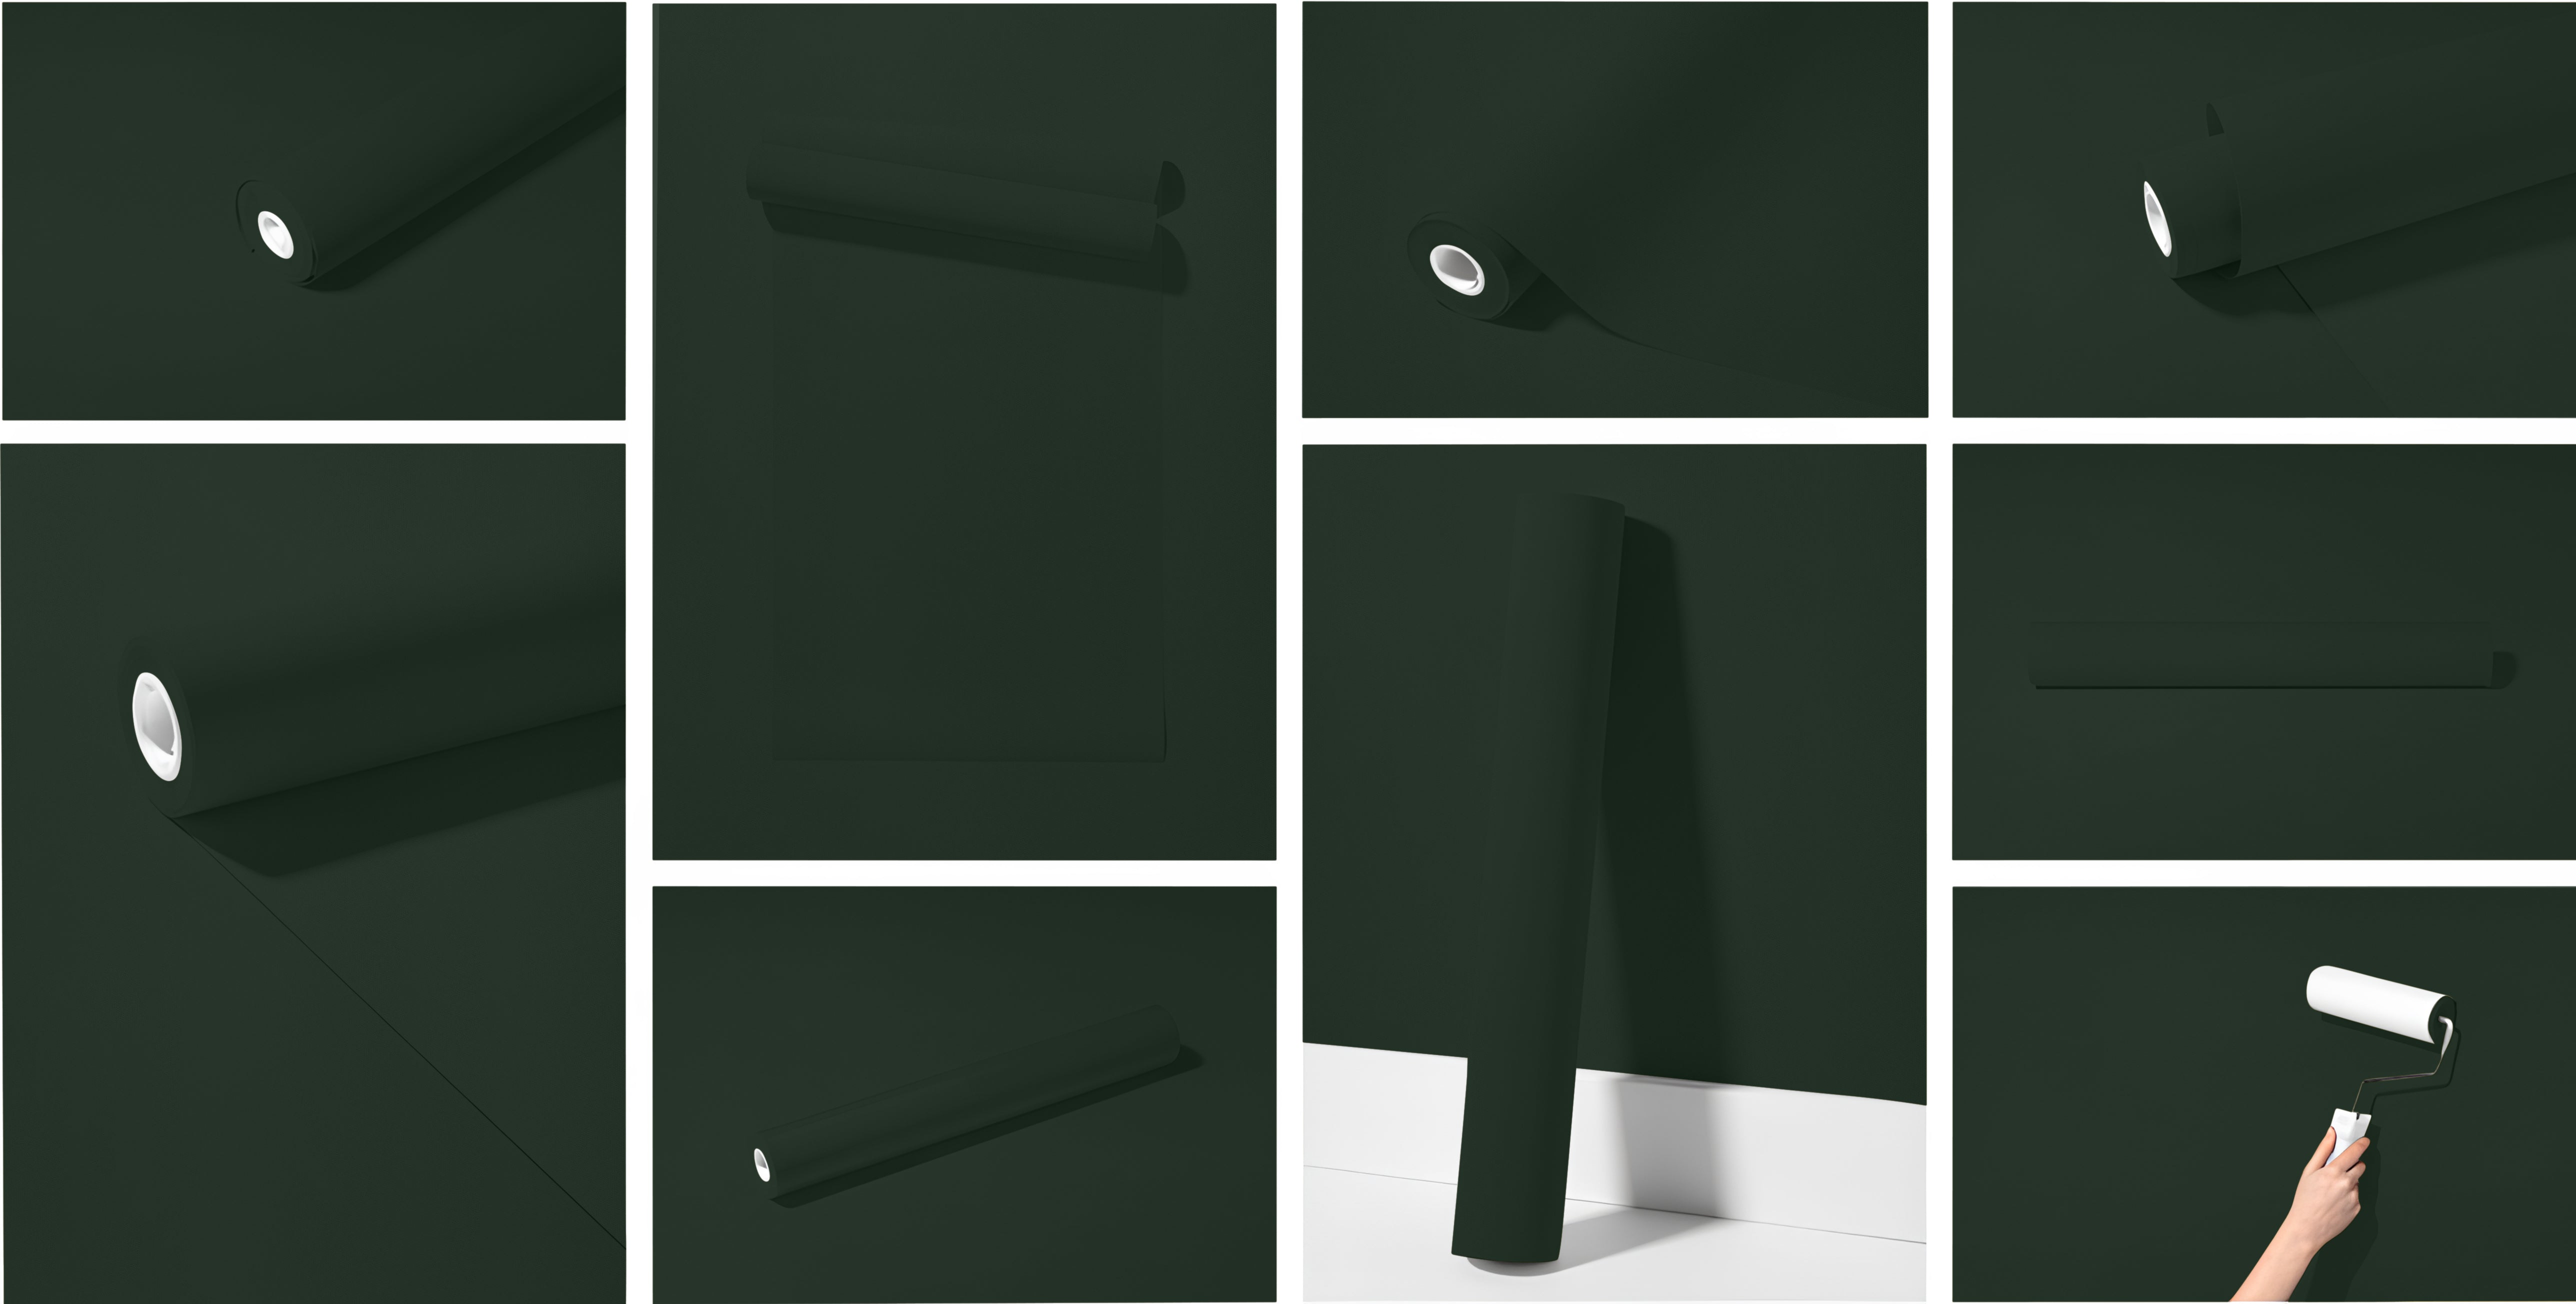 Peel & Stick Removable Re-usable Paint - Color RAL 6009 Fir Green - offRAL™ - RALRAW LLC, USA